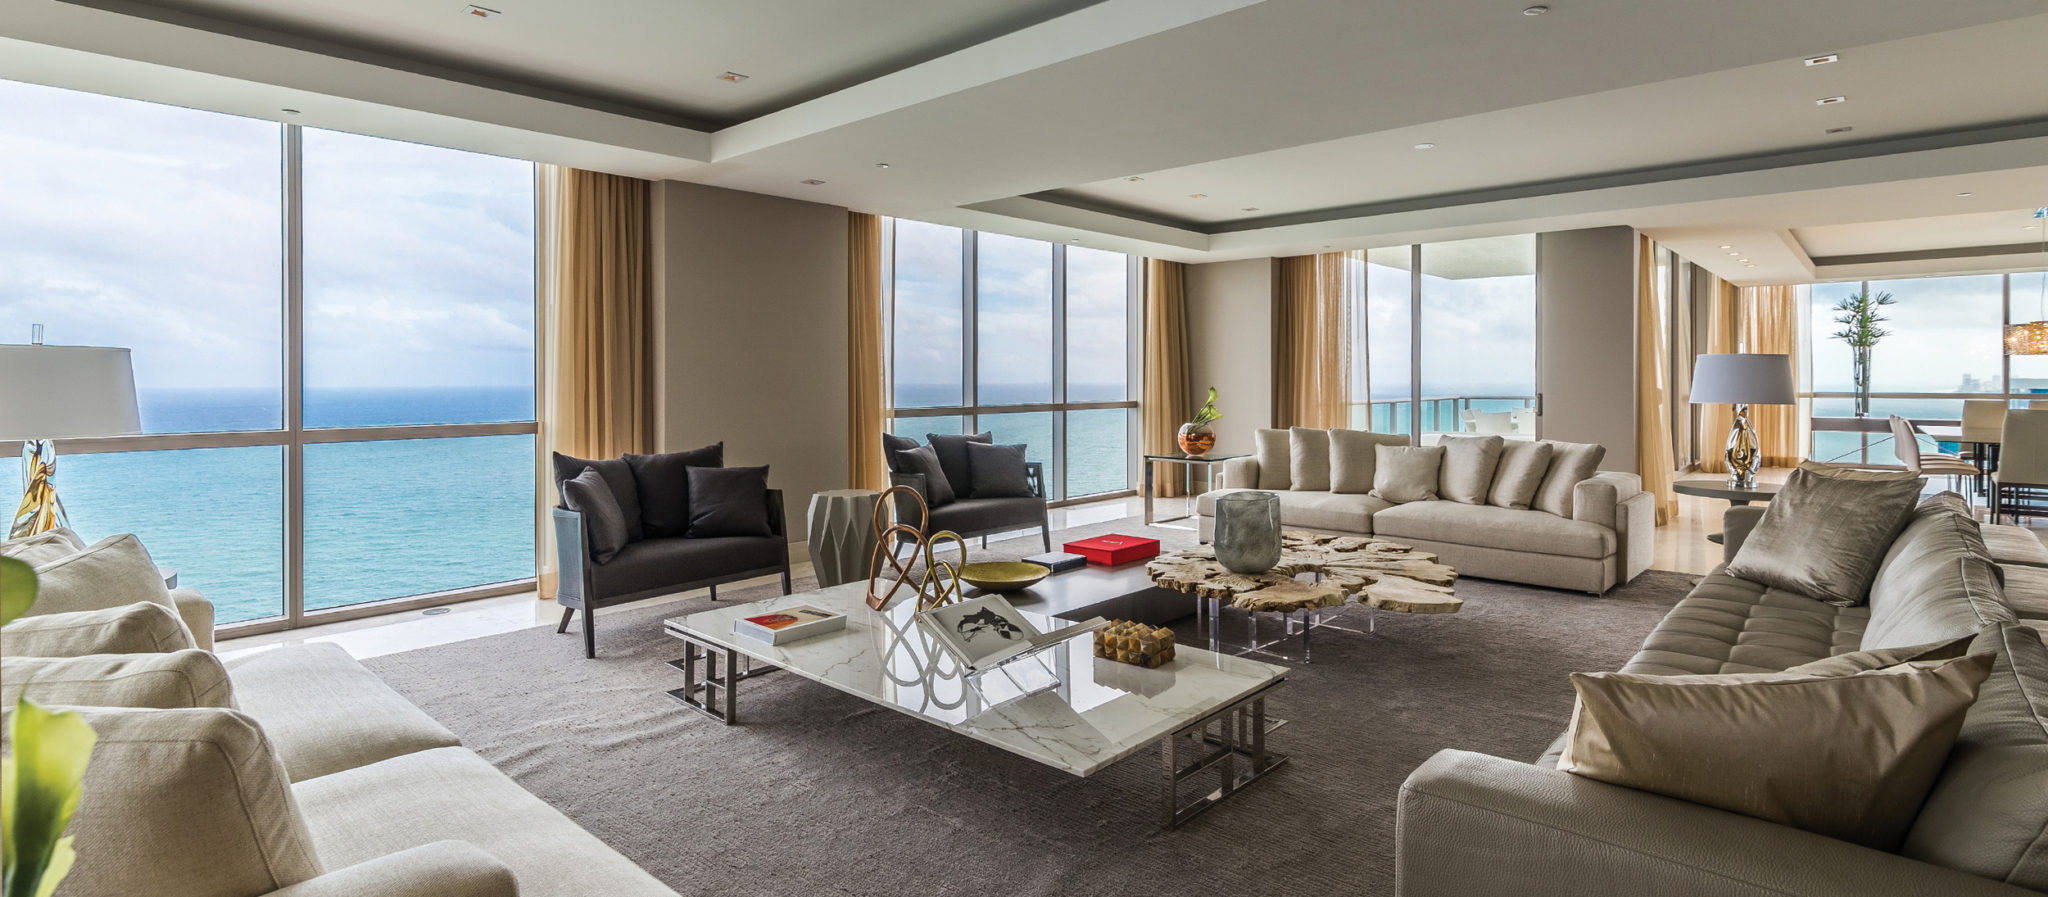 Miami’s Exclusive Oceanfront Properties Attract Wealth Buyers Despite High Price Tags